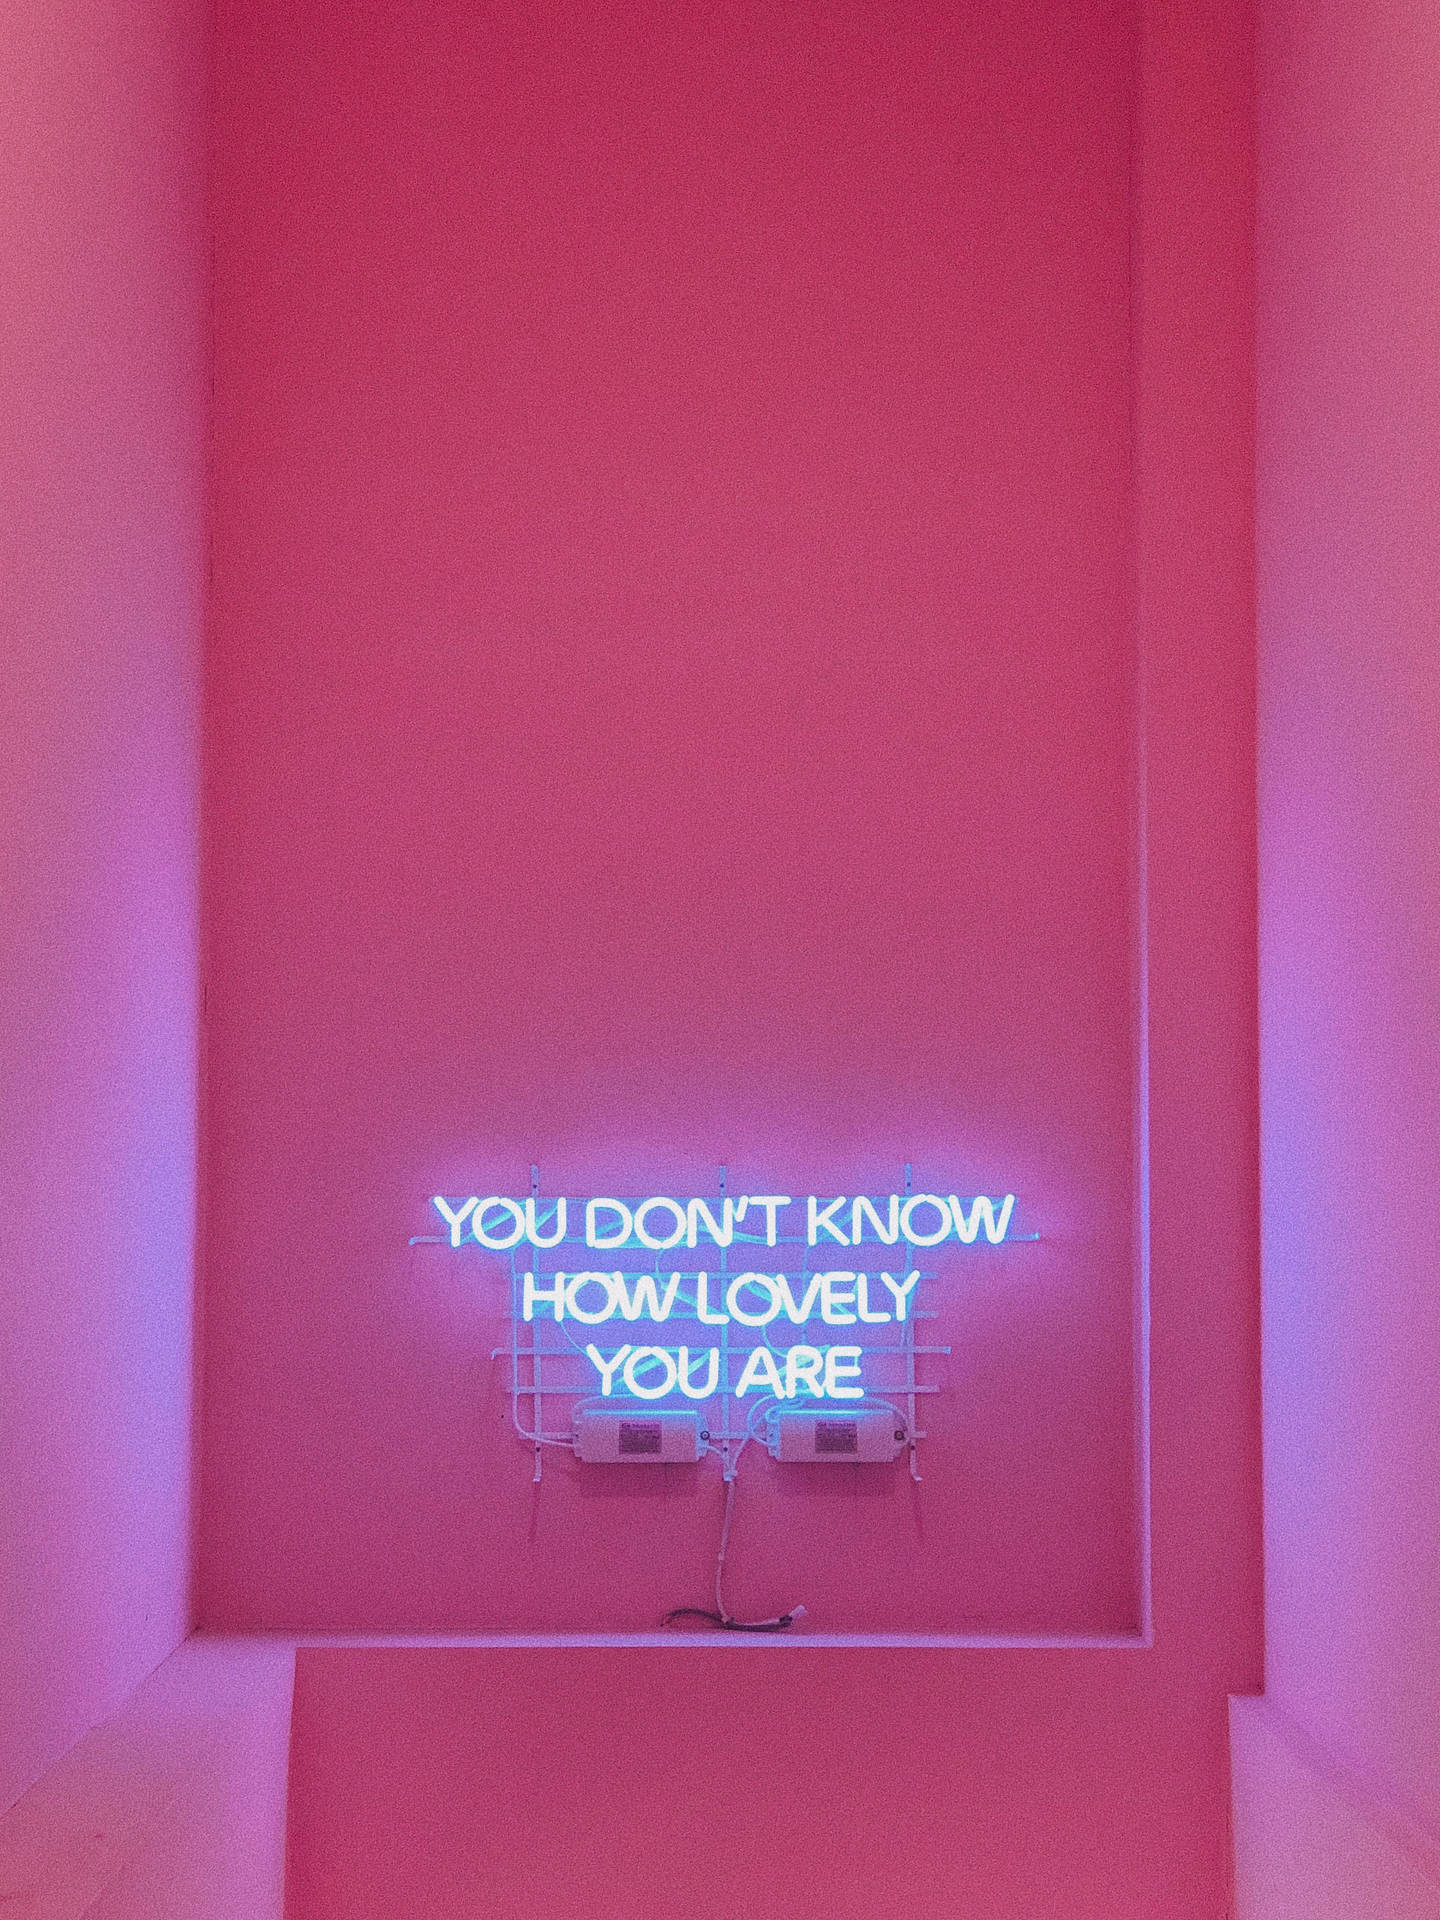 Aesthetic Quotes In Pink Room